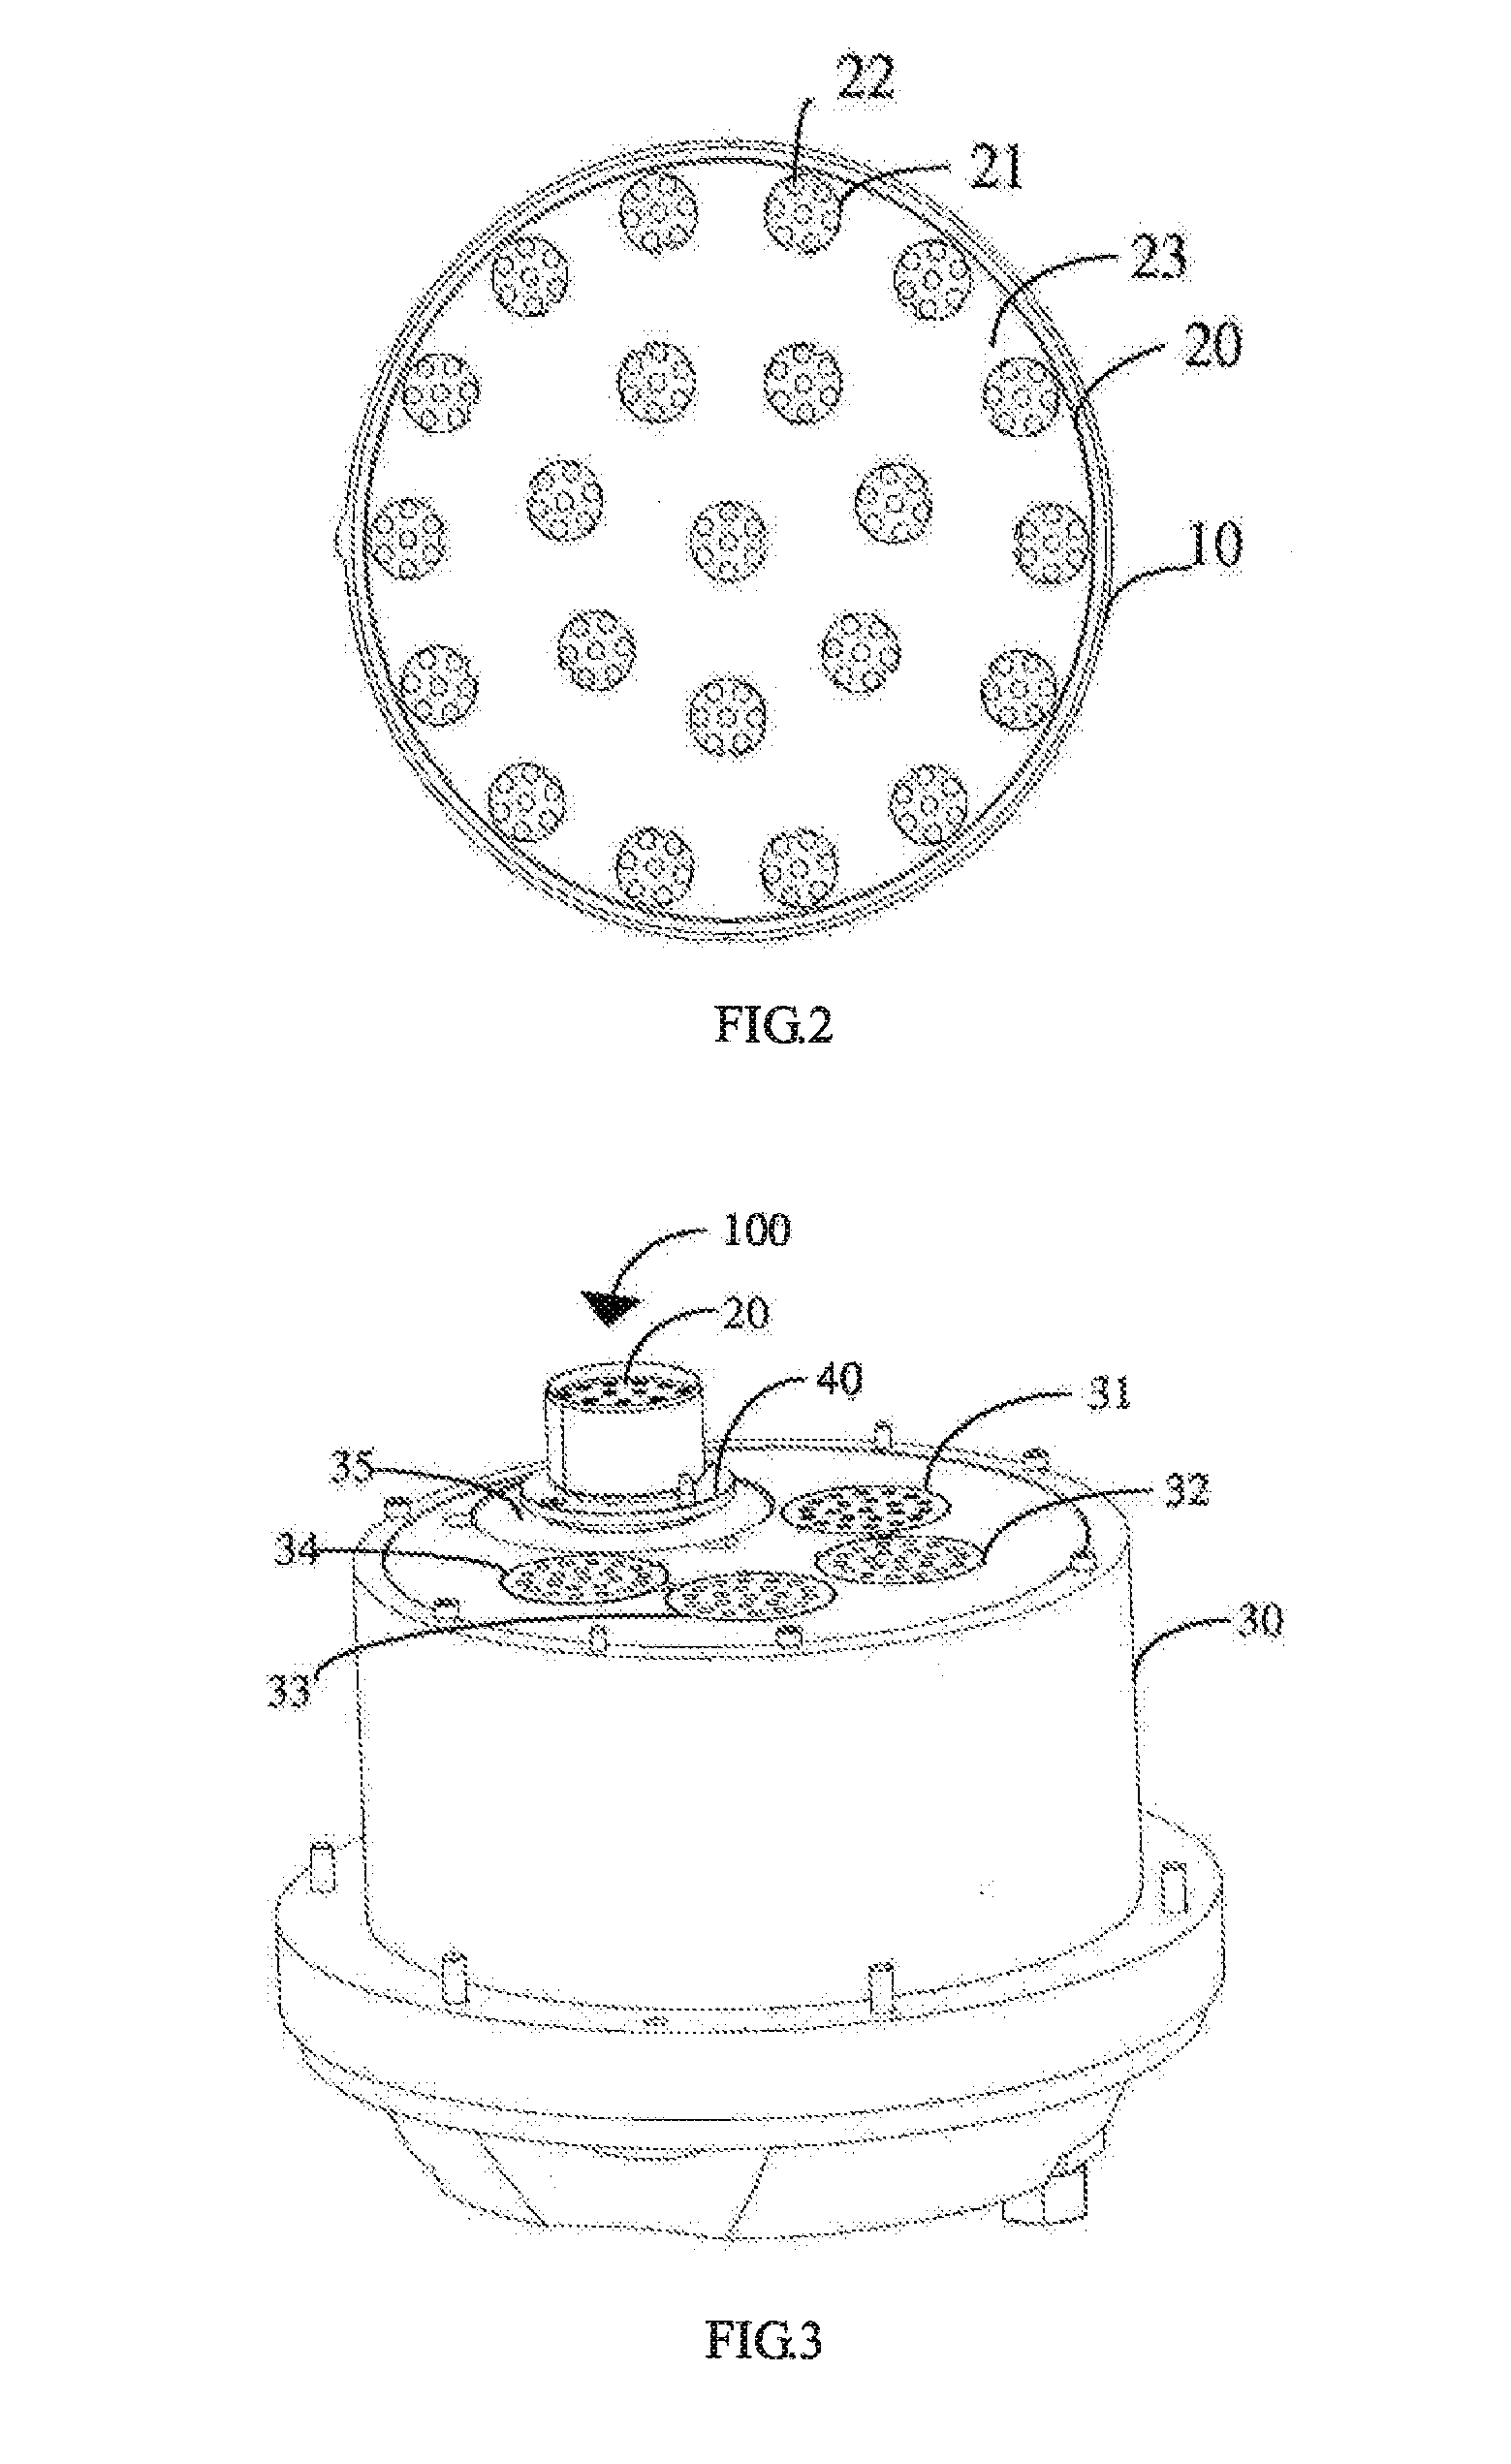 Self-focusing radioactive source device and radiating apparatus employing the same